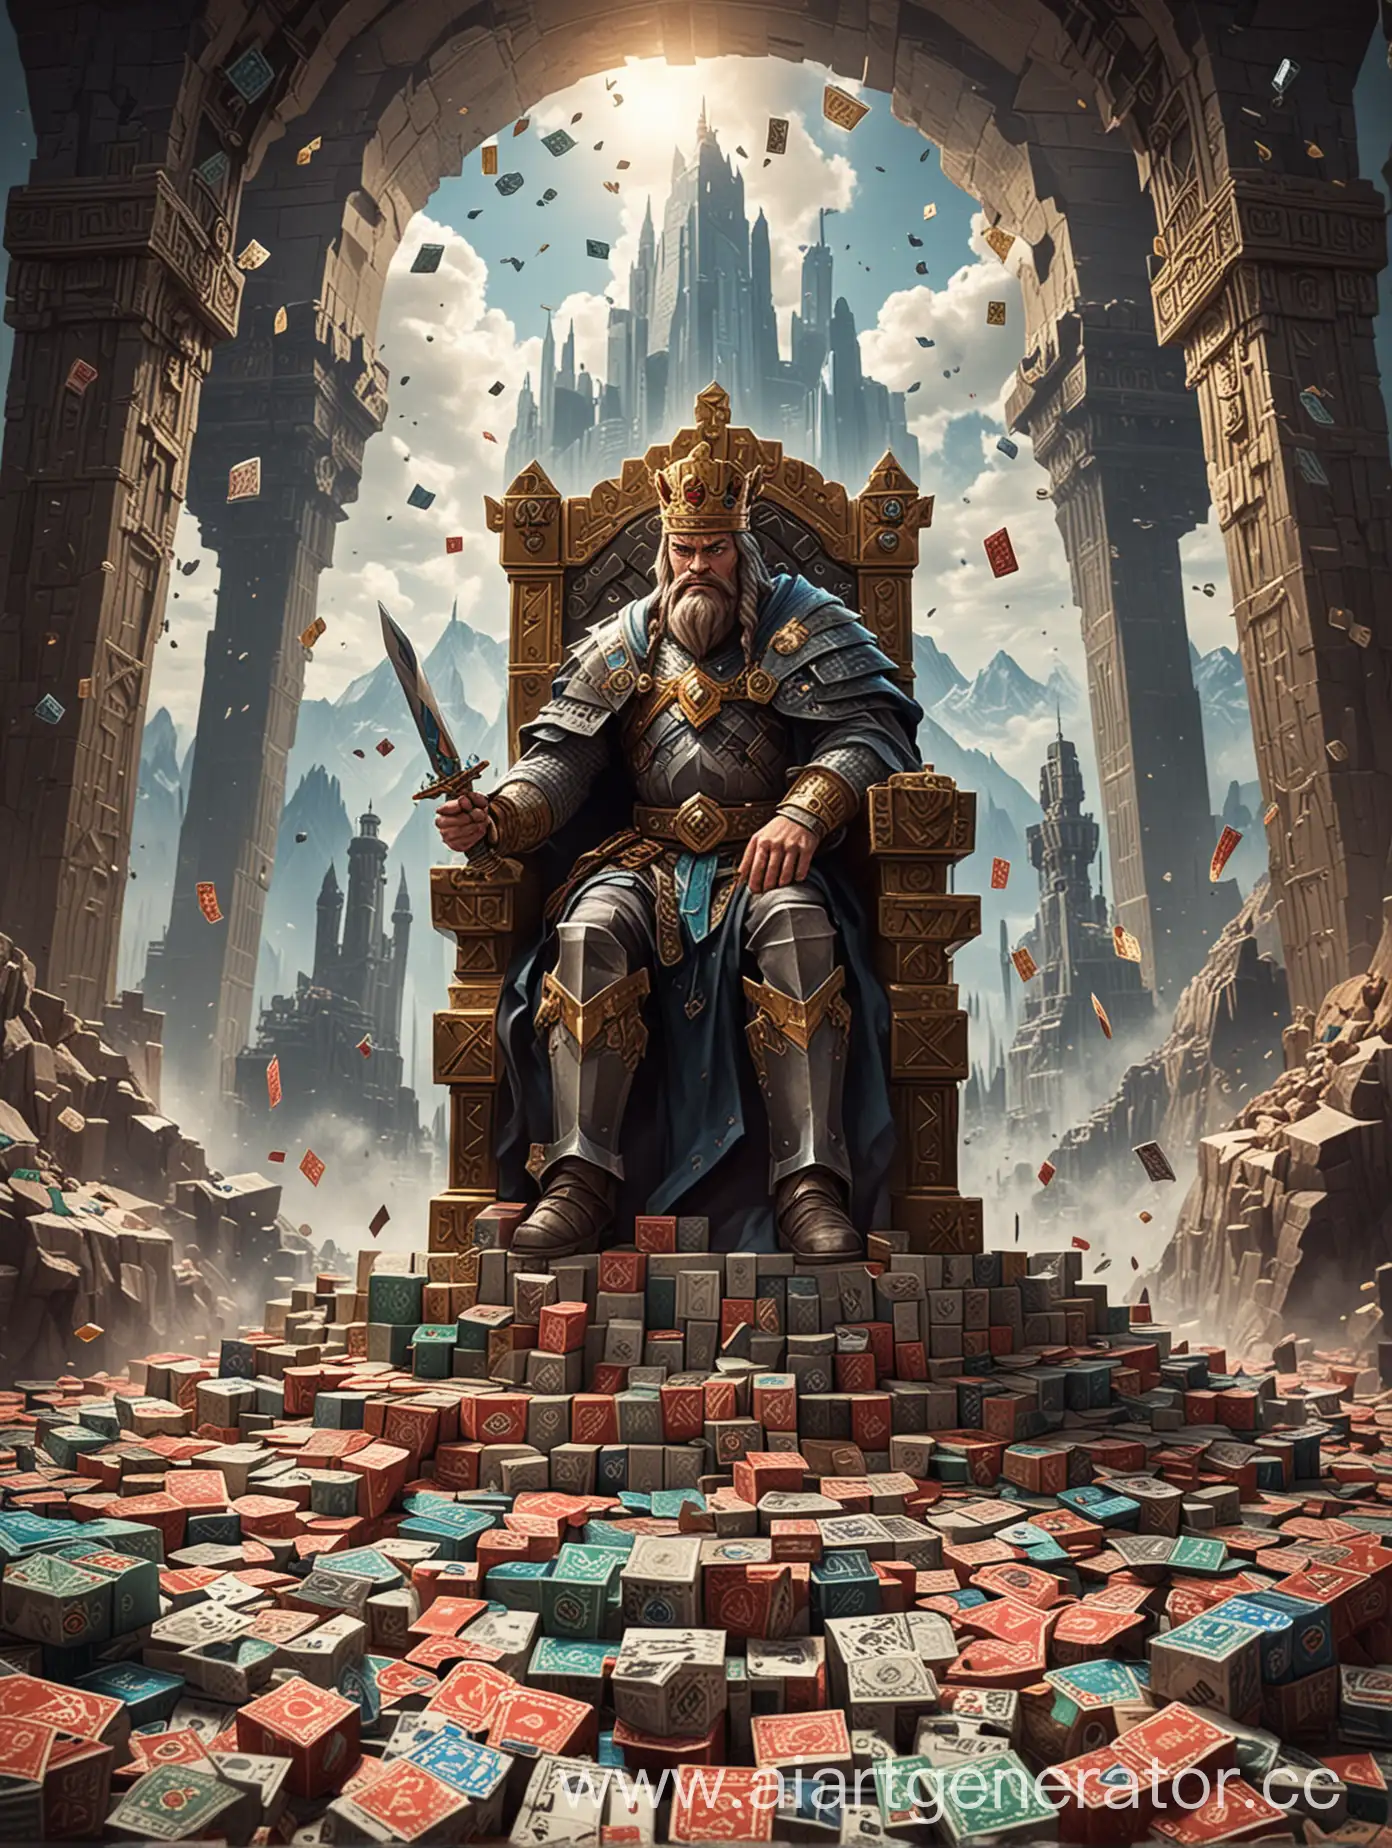 King-Holding-Minecraft-Sword-on-Giant-Throne-Surrounded-by-Mountains-of-Chips-and-Money